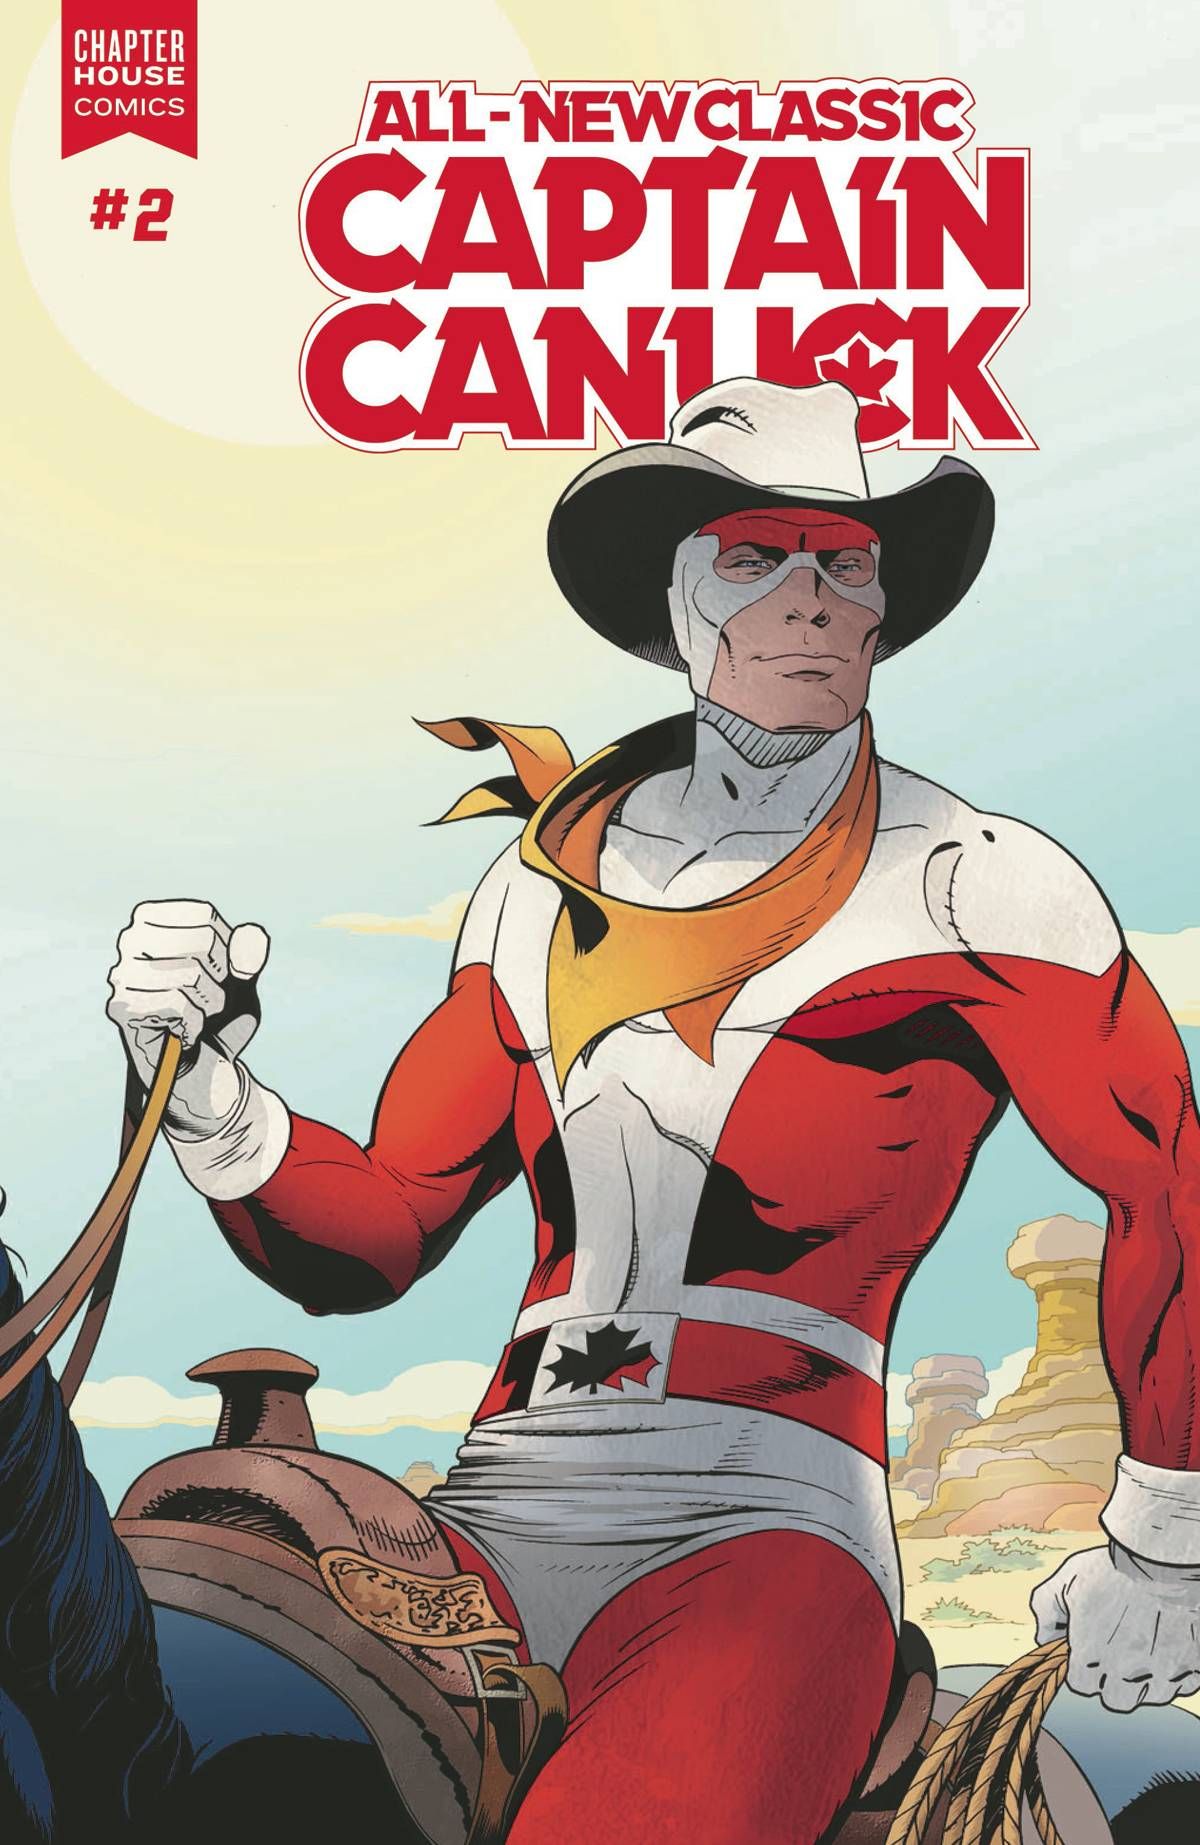 All-New Classic Captain Canuck #2 Comic